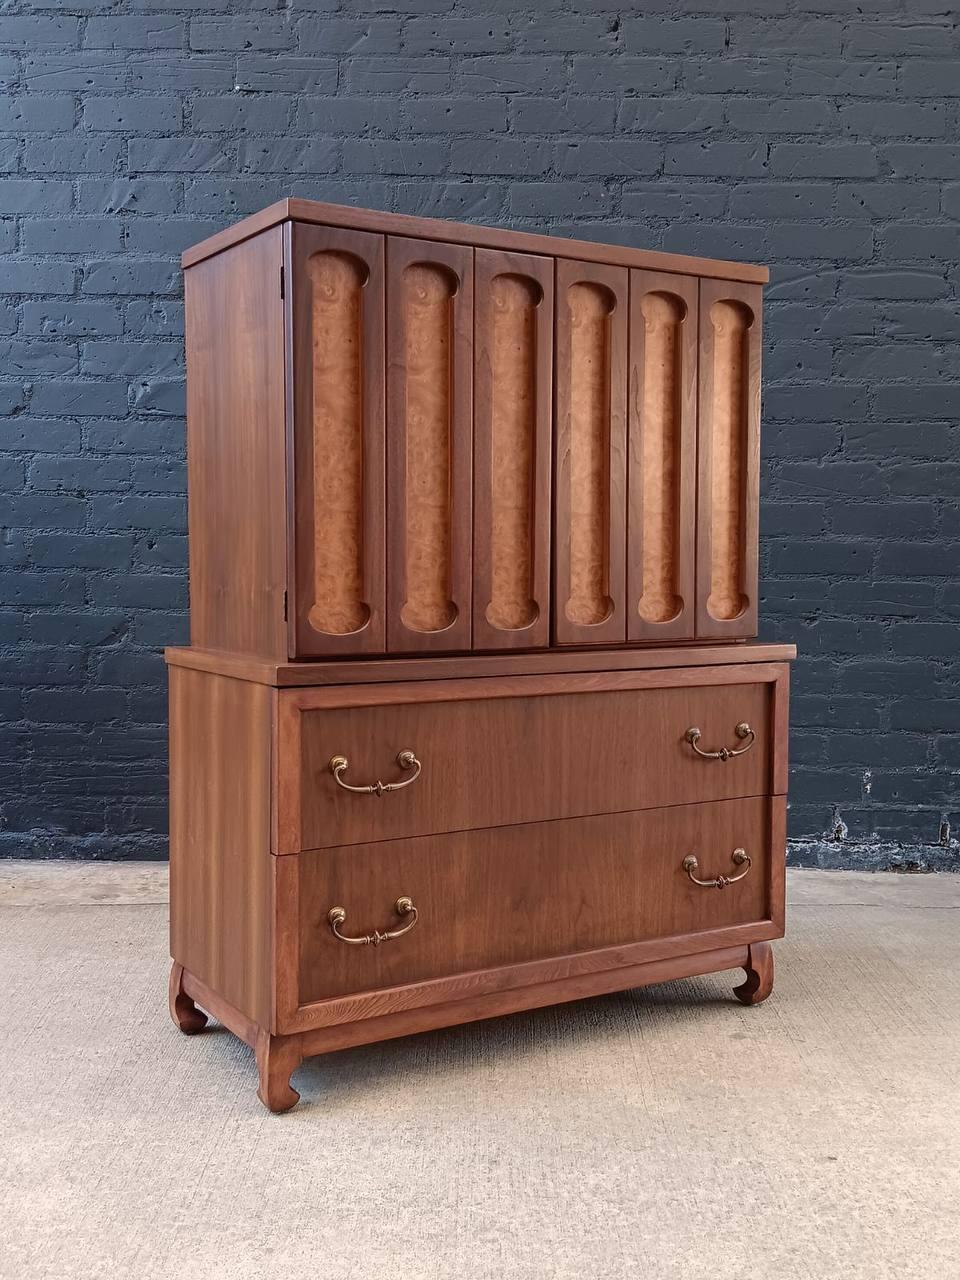 With over 15 years of experience, our workshop has followed a careful process of restoration, showcasing our passion and creativity for vintage designs that can seamlessly be incorporated with many interior decors. Enjoy! :)

Materials: Walnut,